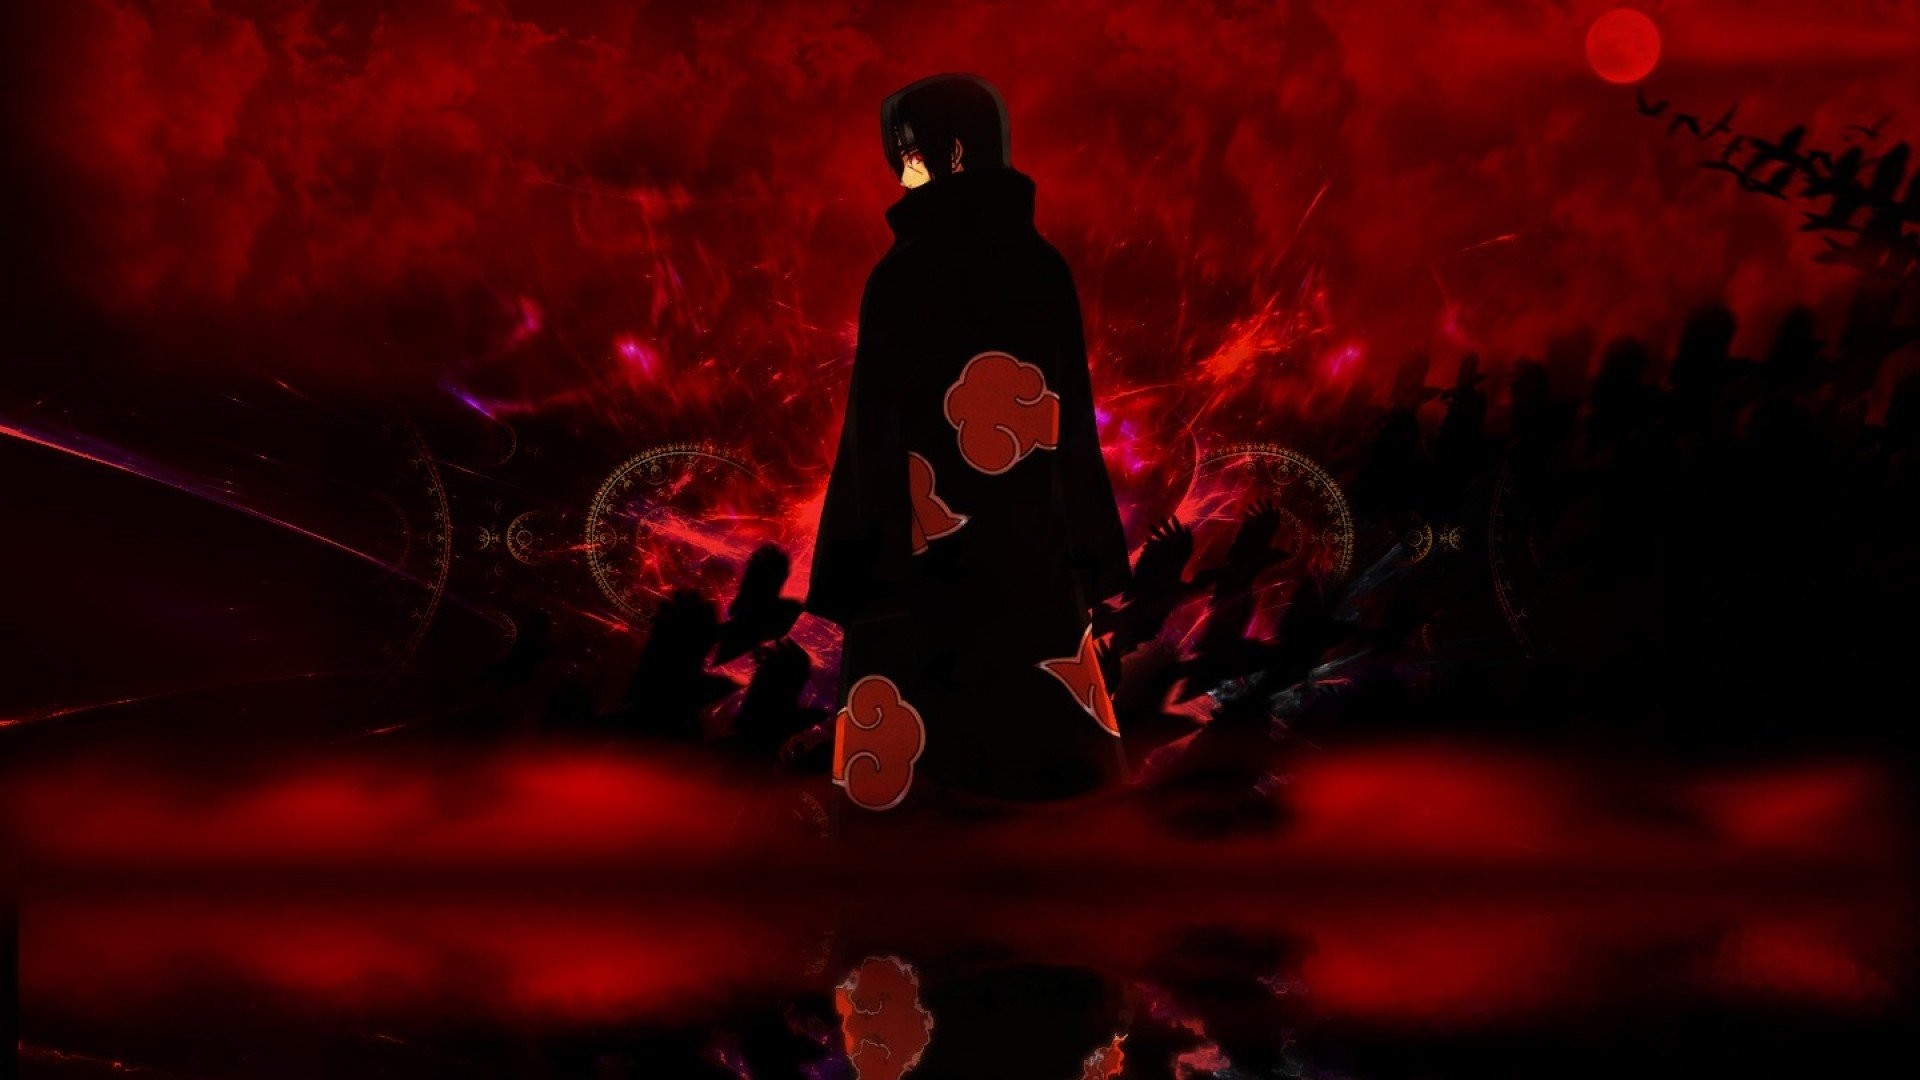 itachi uchiha wallpaper download free awesome backgrounds for